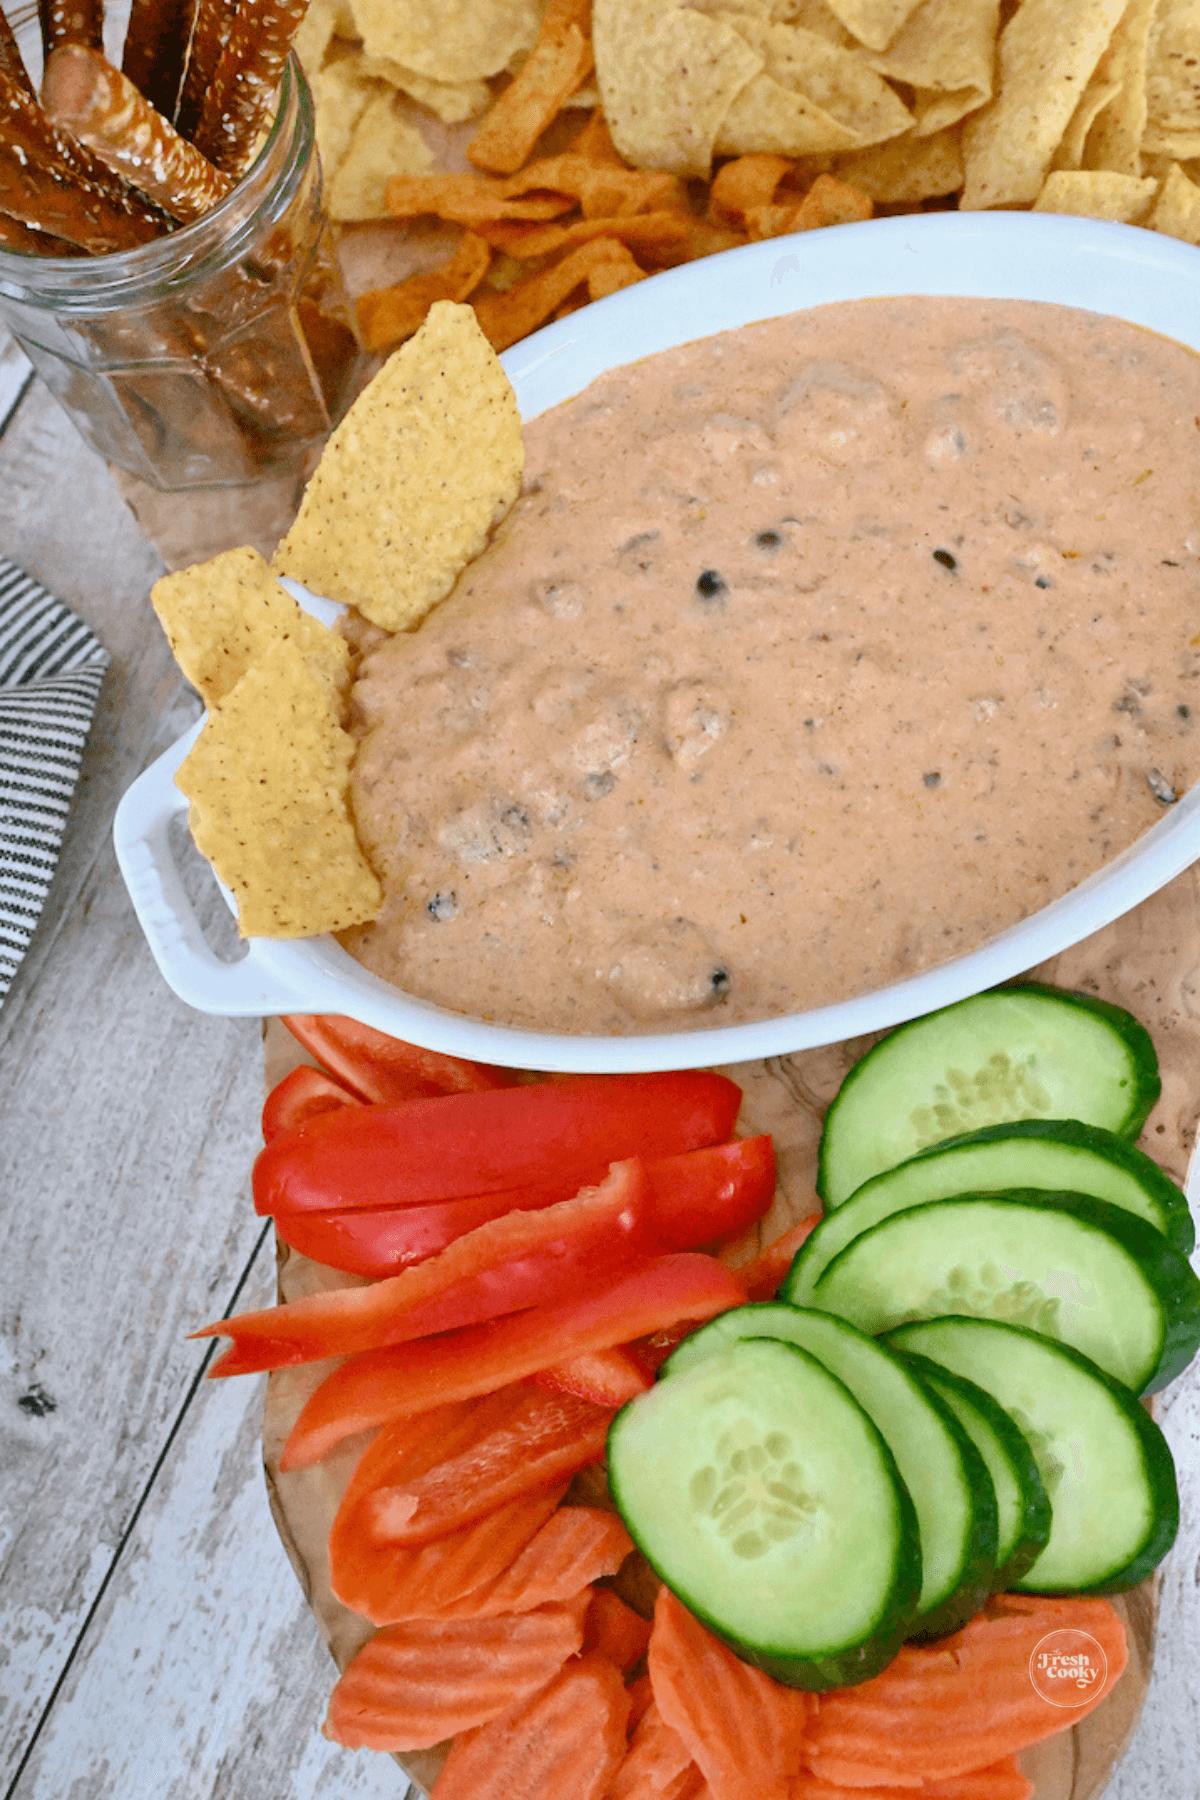 Keep it simple and don't add extra cheese to the top of this yummy 3 ingredient chili cheese dip.